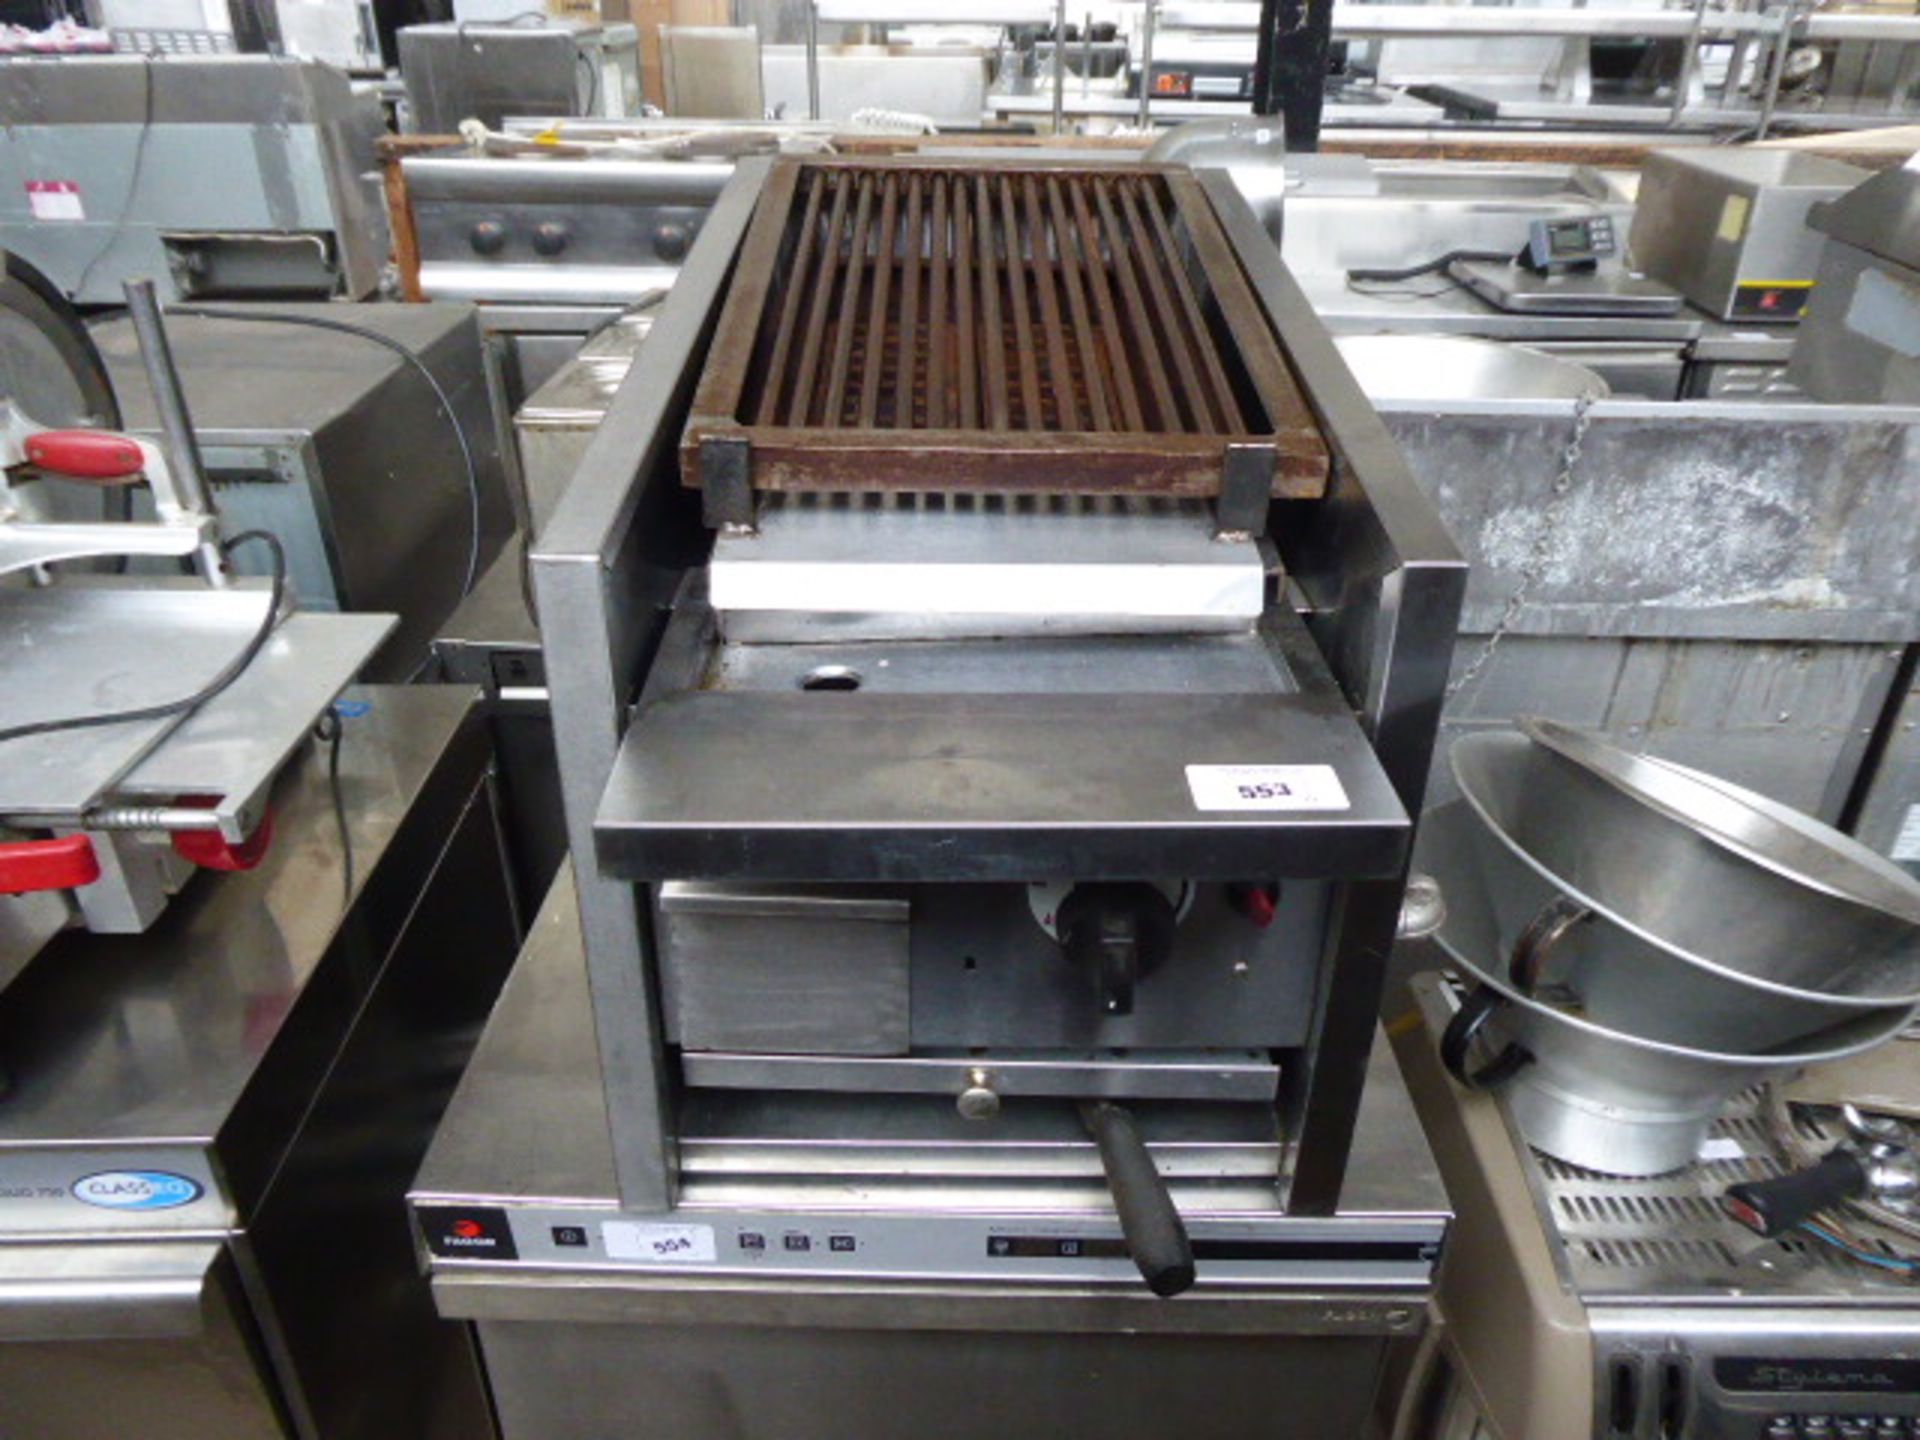 40cm gas chargrill